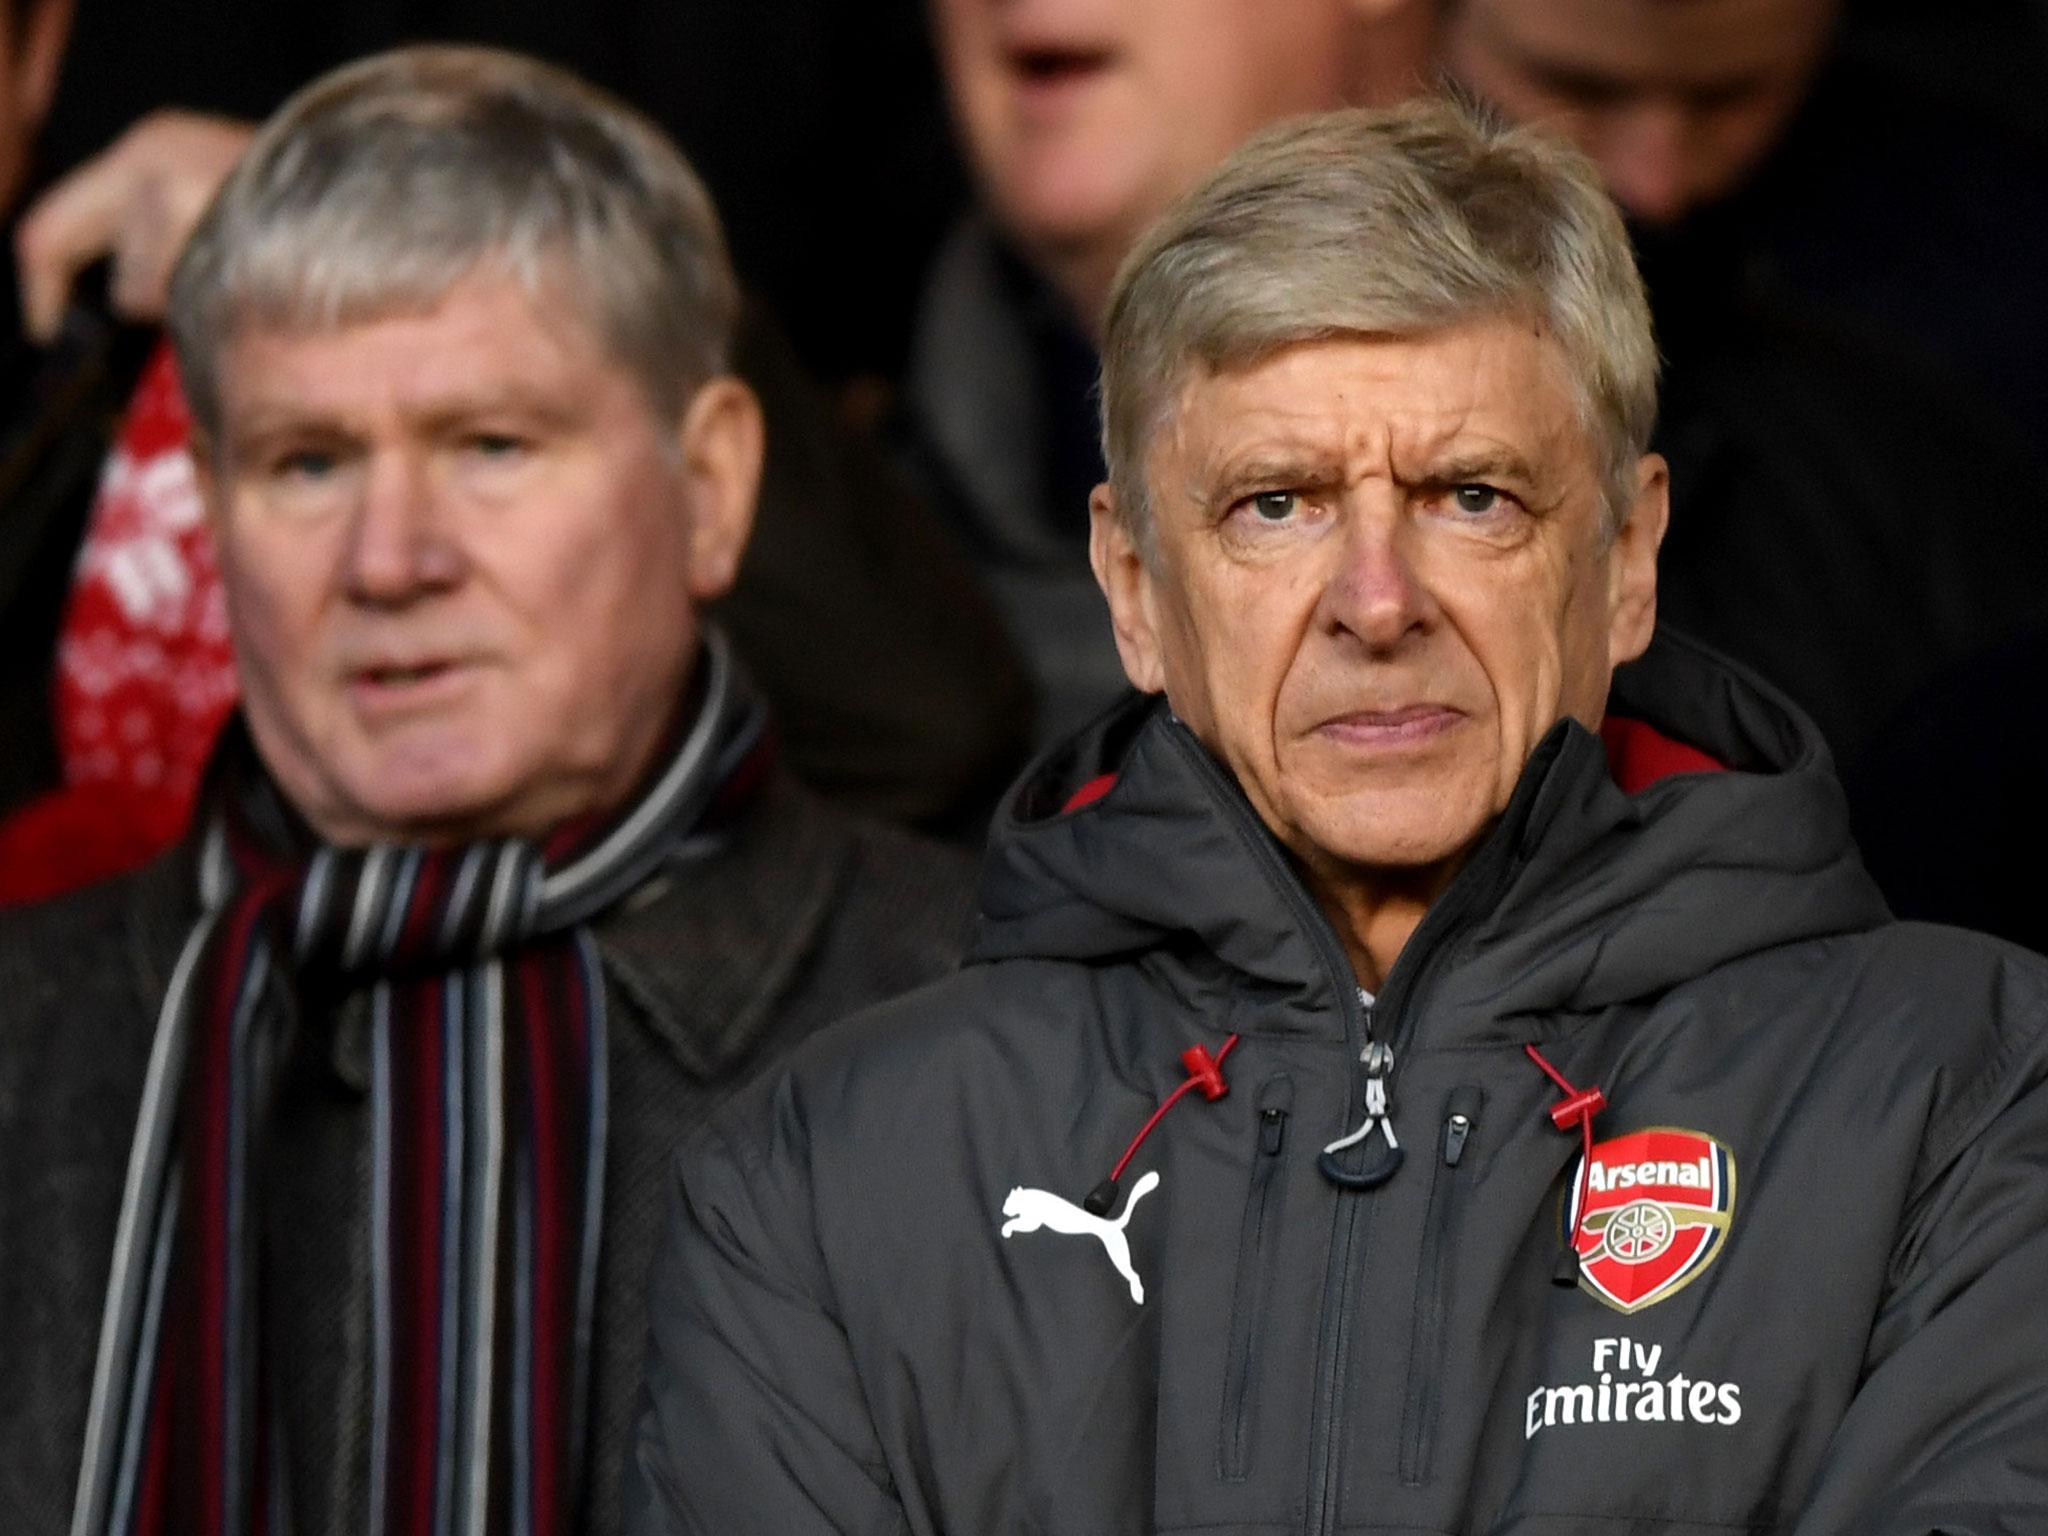 Arsene Wenger could only watch from the stands – this was the first game of his touchline ban – as his team was ripped apart by Forest